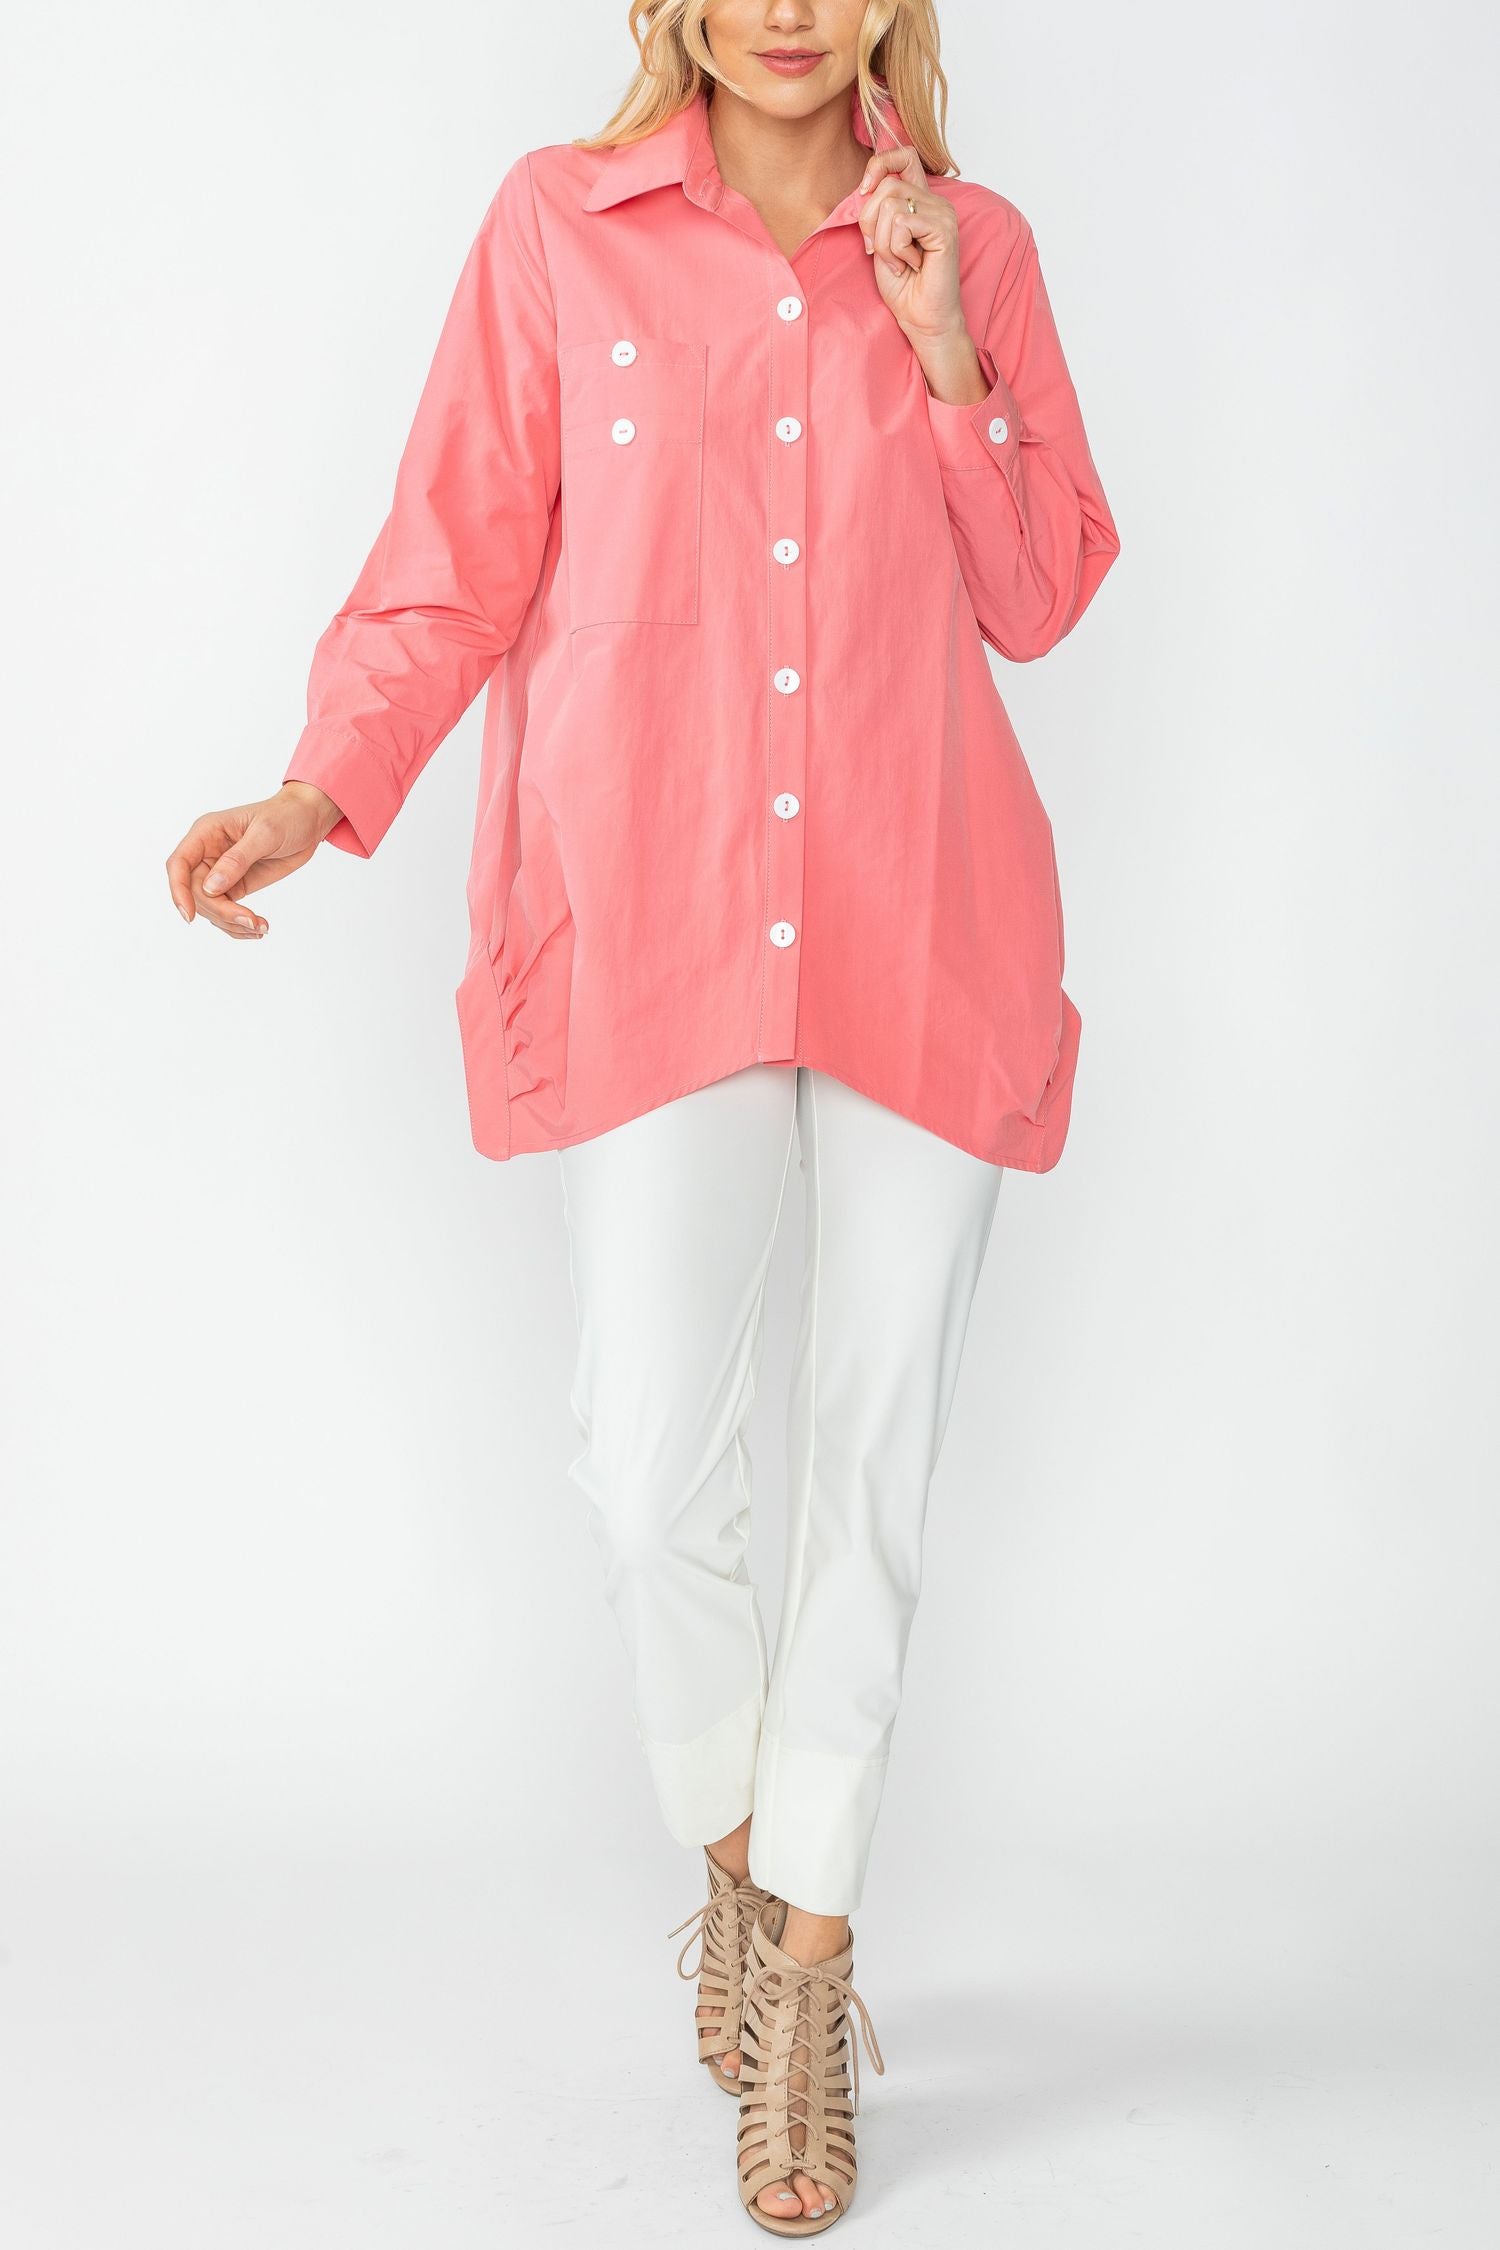 Coral Bottom Side Pleats Blouse